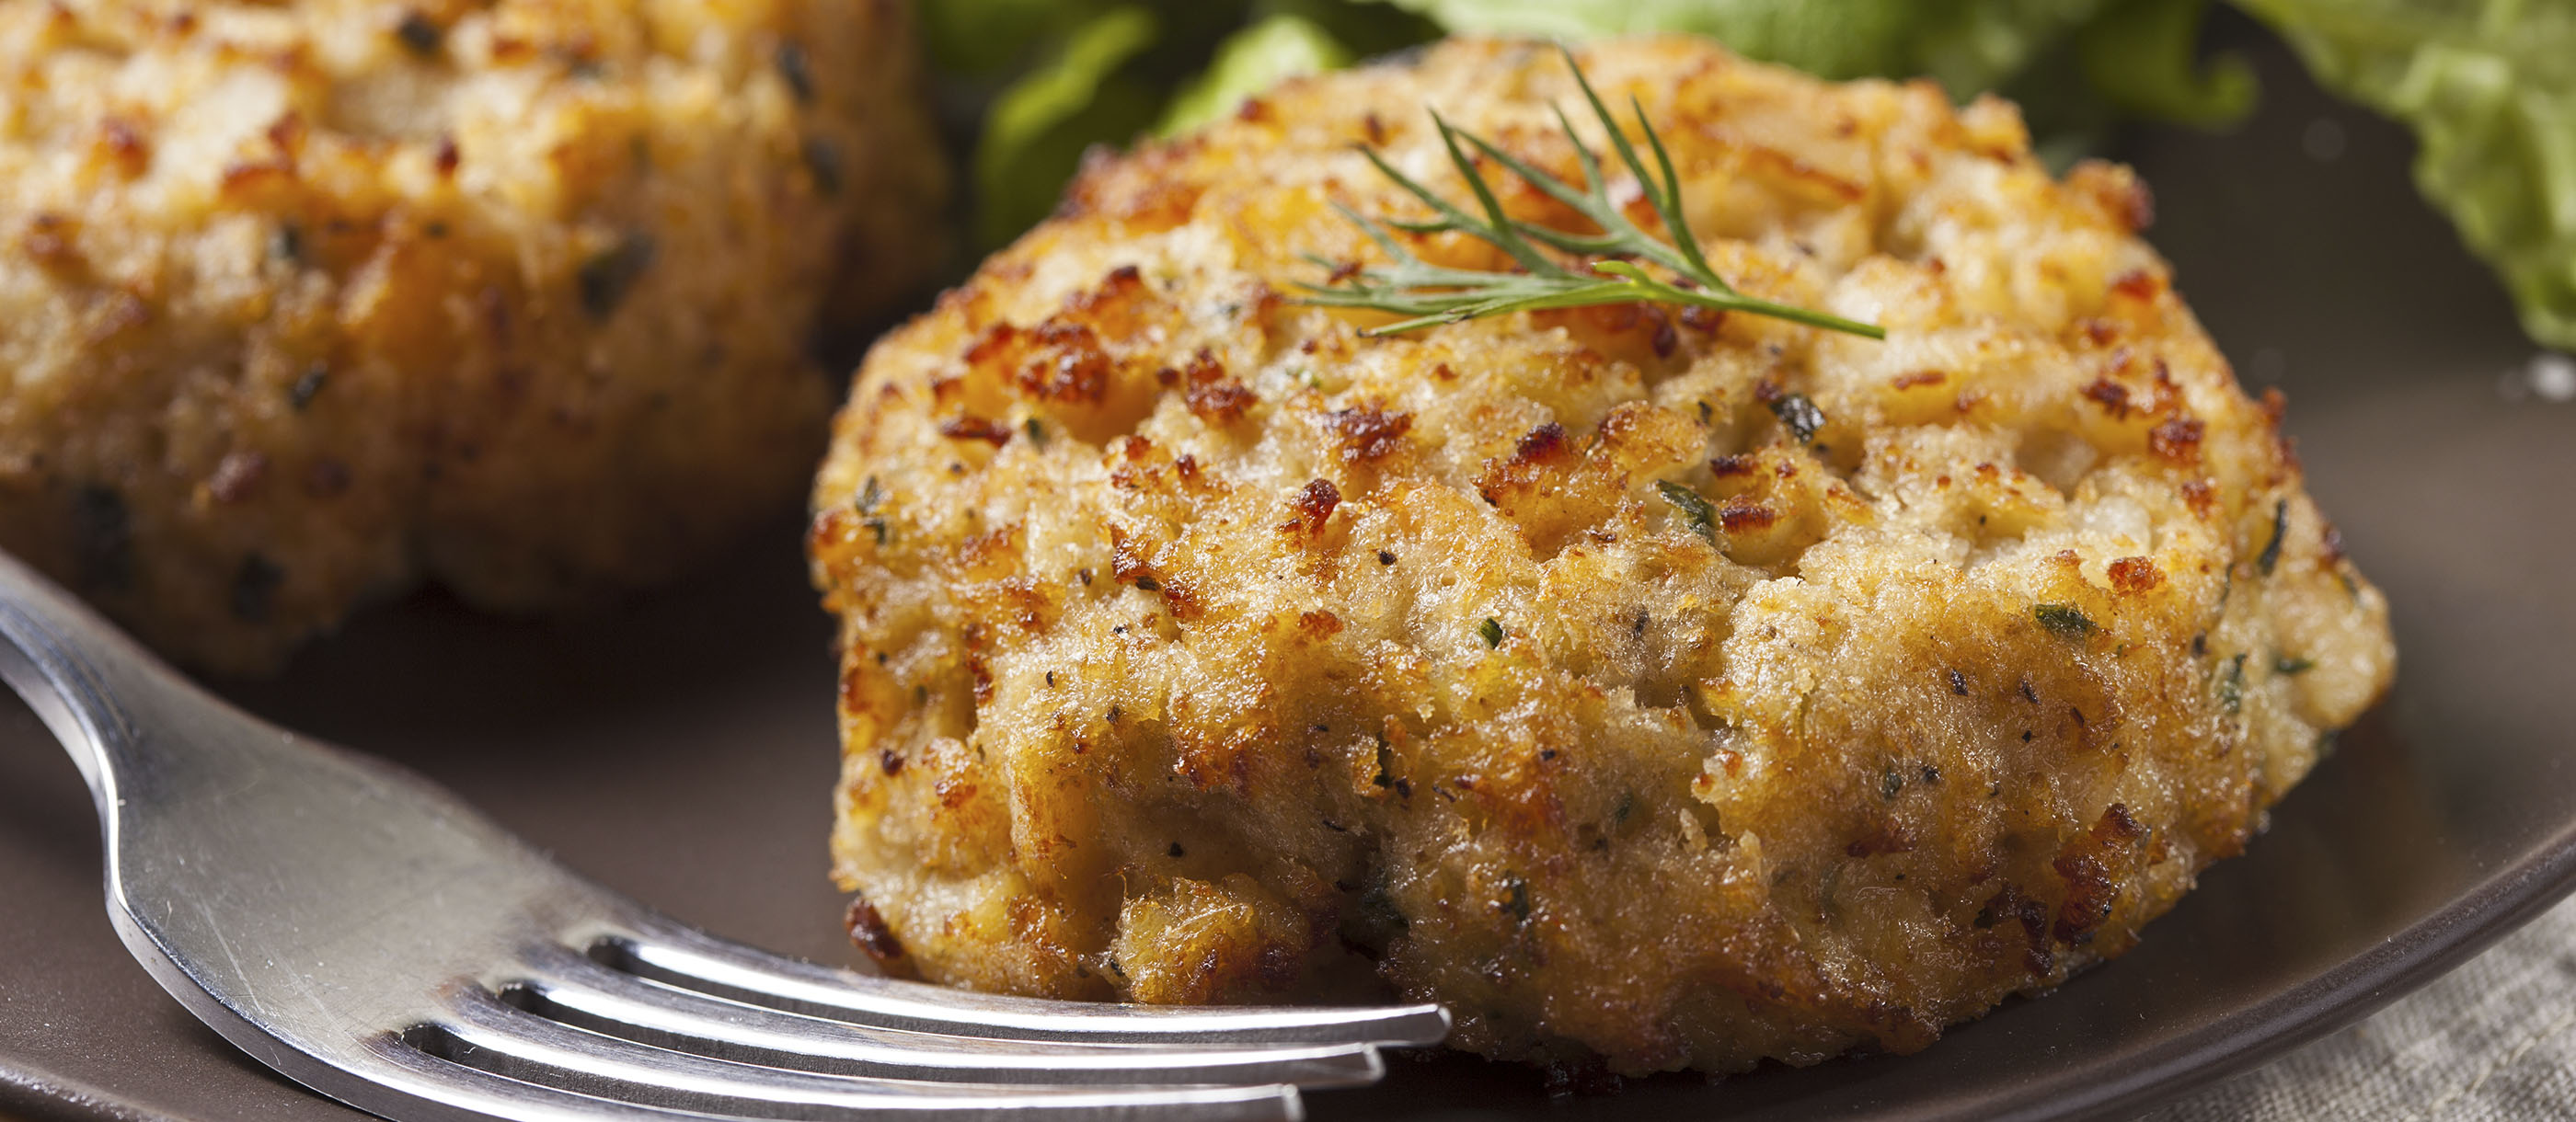 Maryland Crab Cakes with Quick Tartar Sauce - Once Upon a Chef